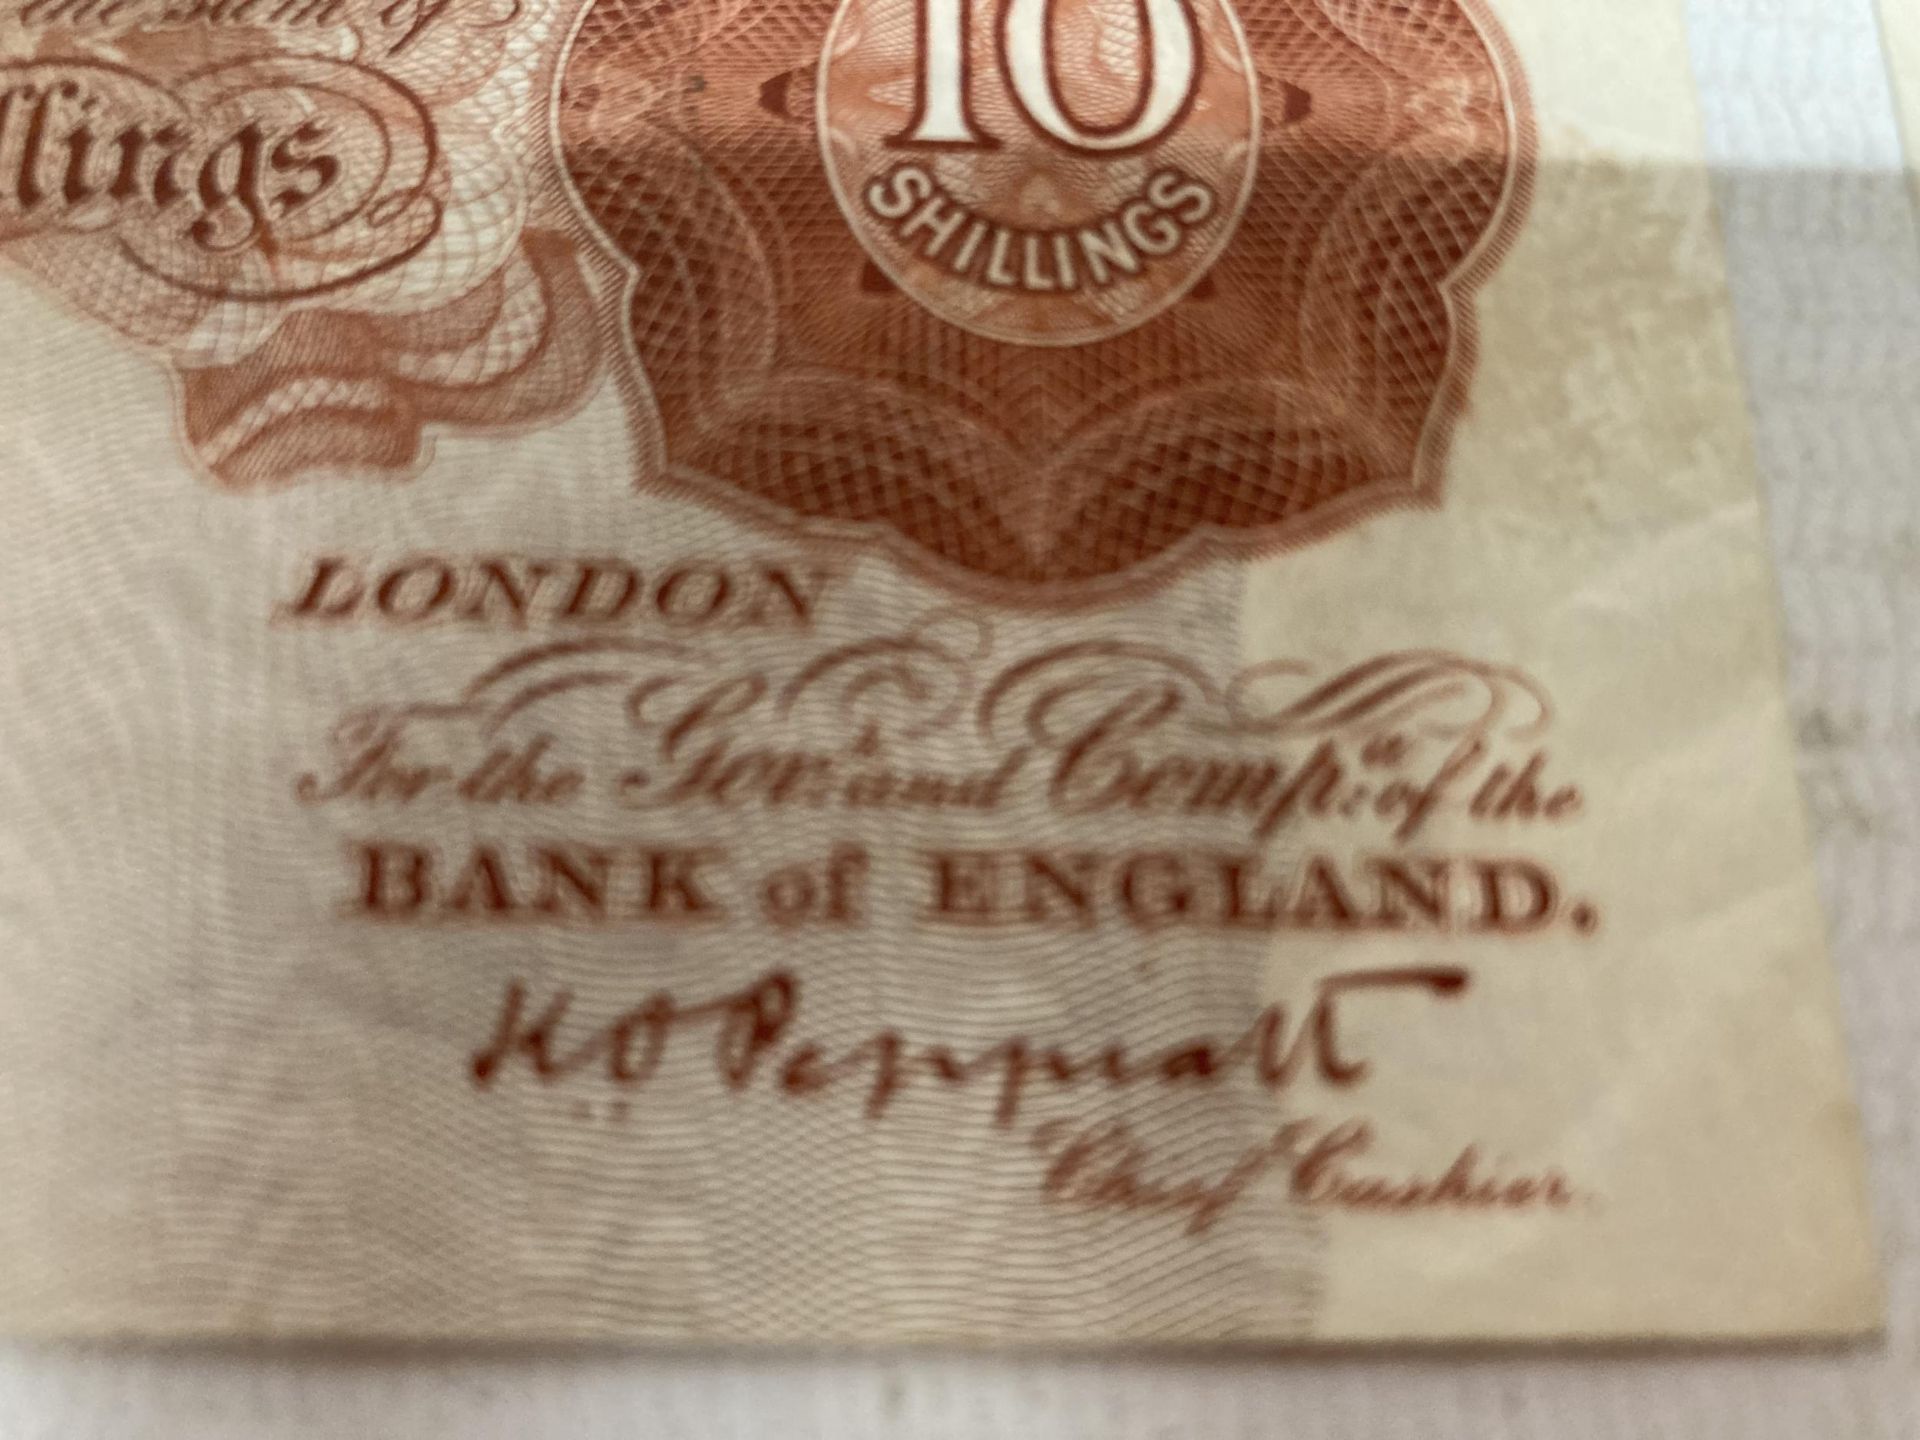 FOUR 1934 TO 1949 BANK OF ENGLAND TEN SHILLINGS NOTES SIGNED PEPPIATT - Image 2 of 3